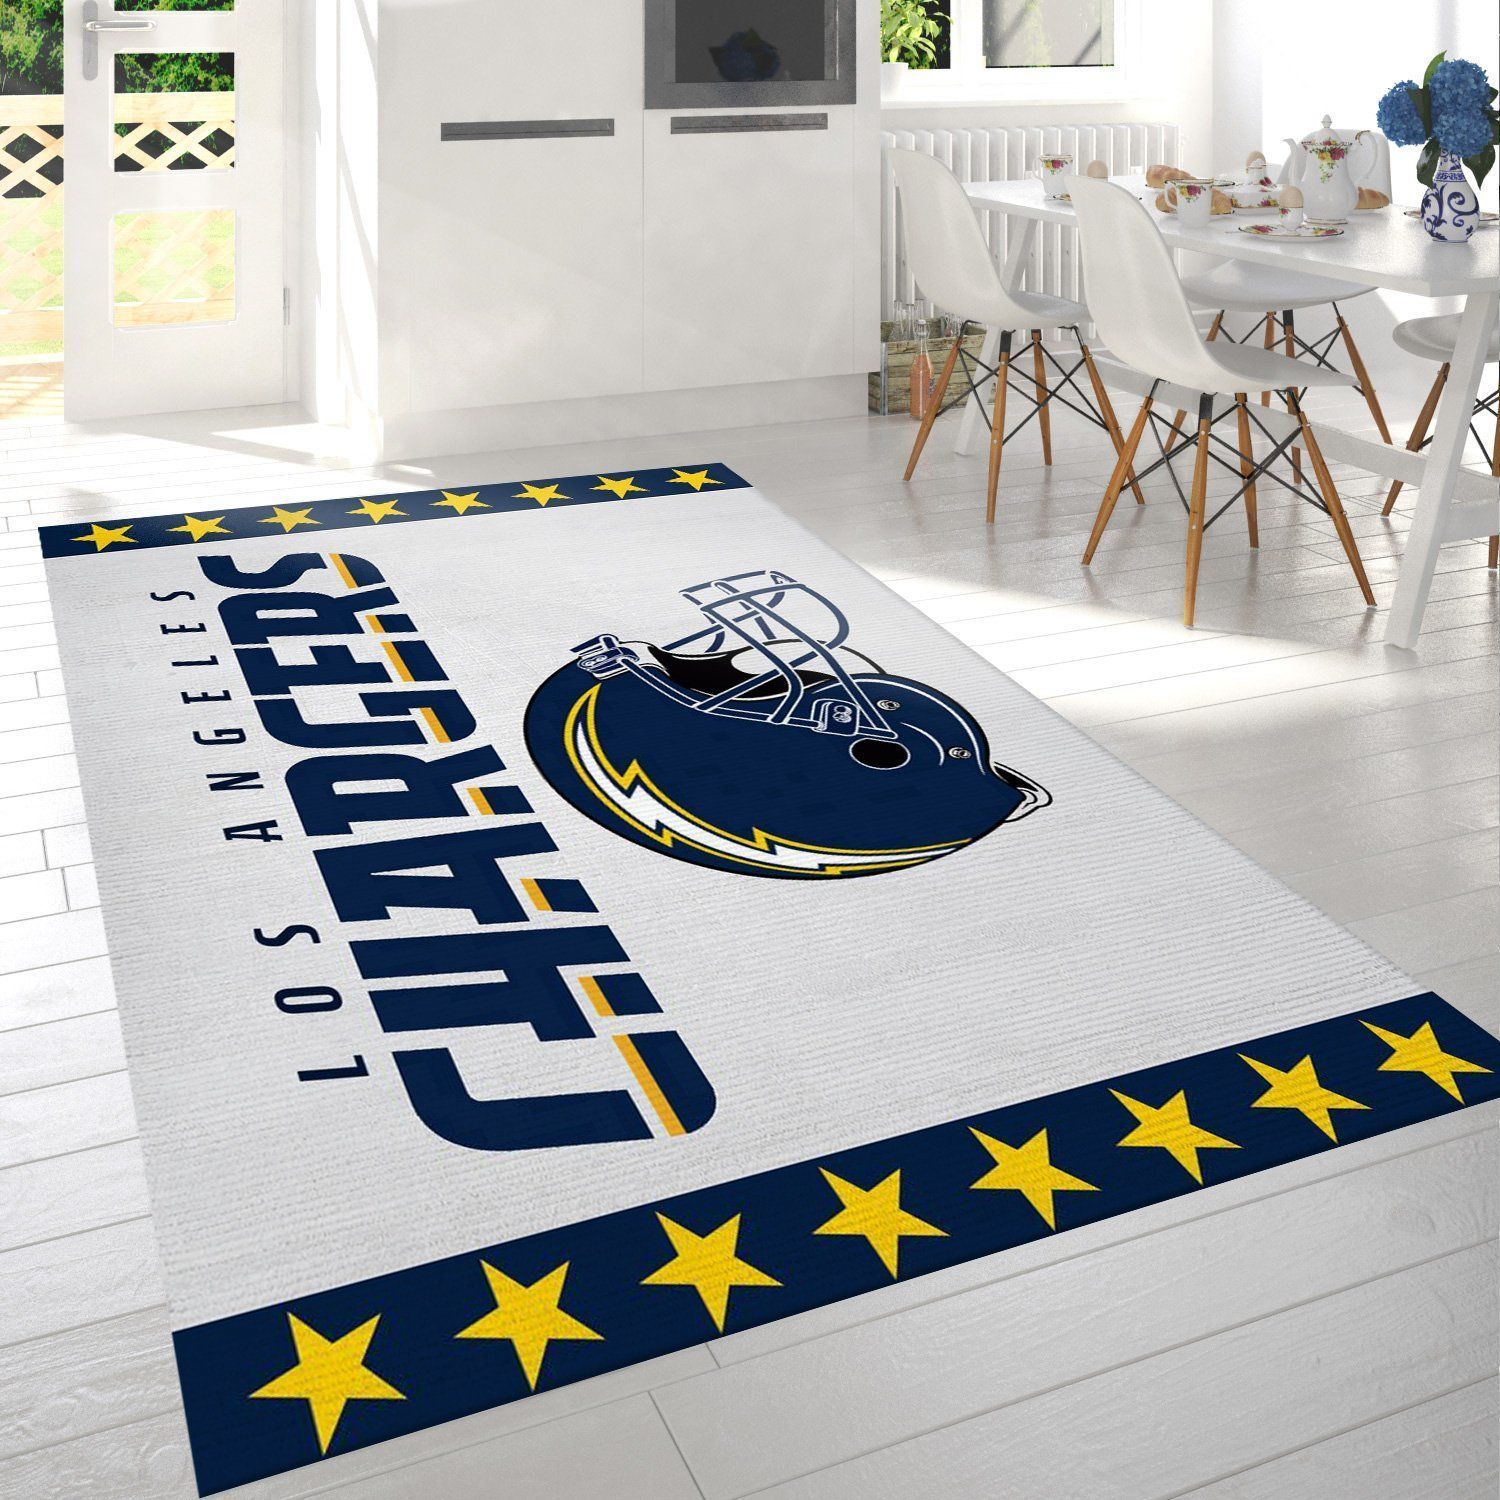 Los Angeles Chargers Nfl Logo Area Rug For Gift Living Room Rug Home Decor Floor Decor - Indoor Outdoor Rugs 1